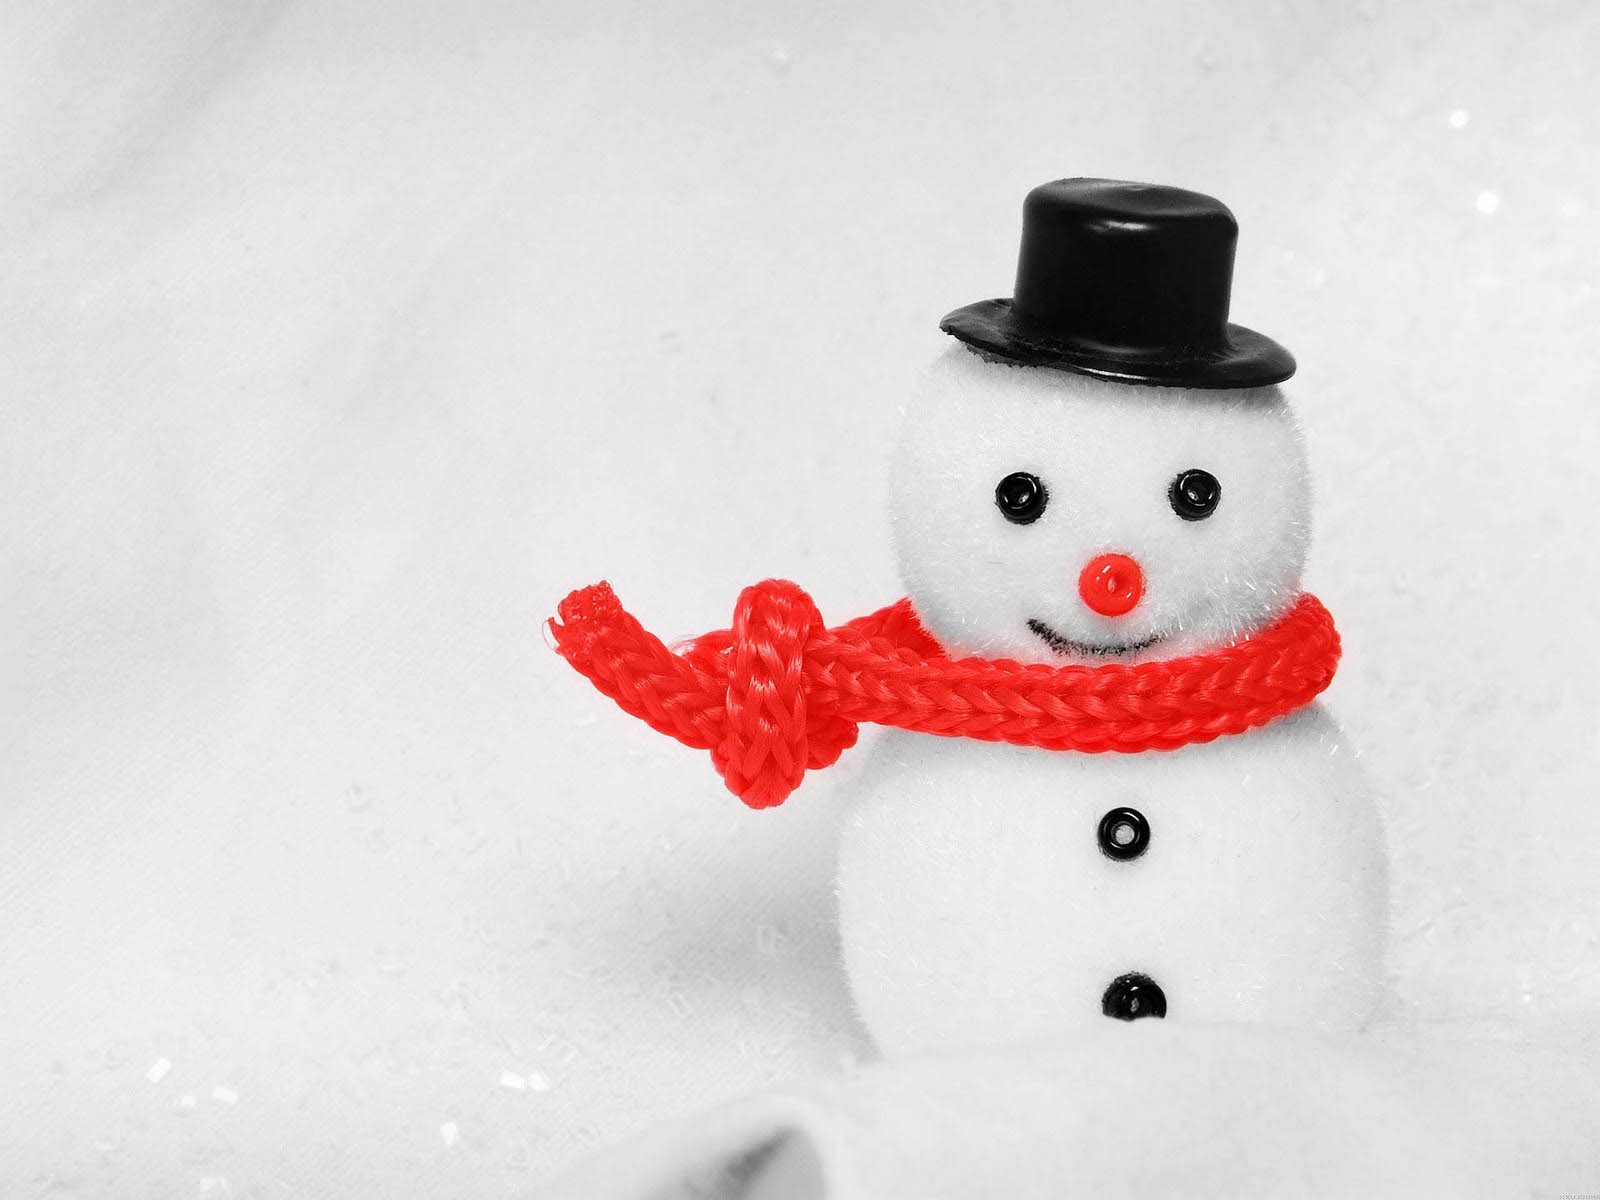 Snowman Wallpaper Background Photos Pictures And Image For